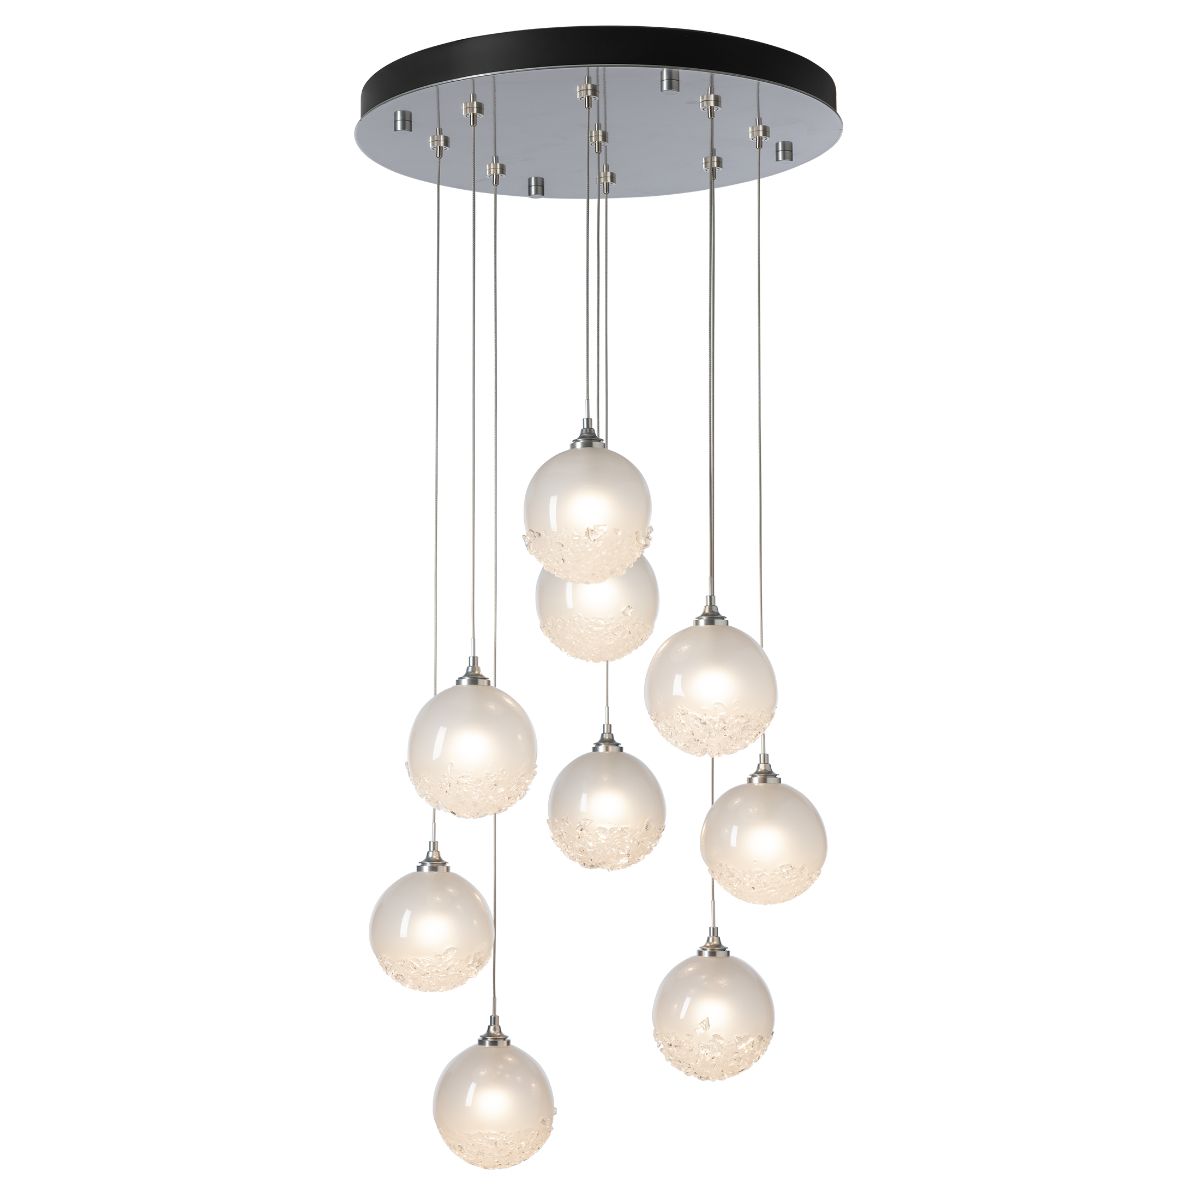 Fritz 9 lights Pendant Light with Long Height - Bees Lighting